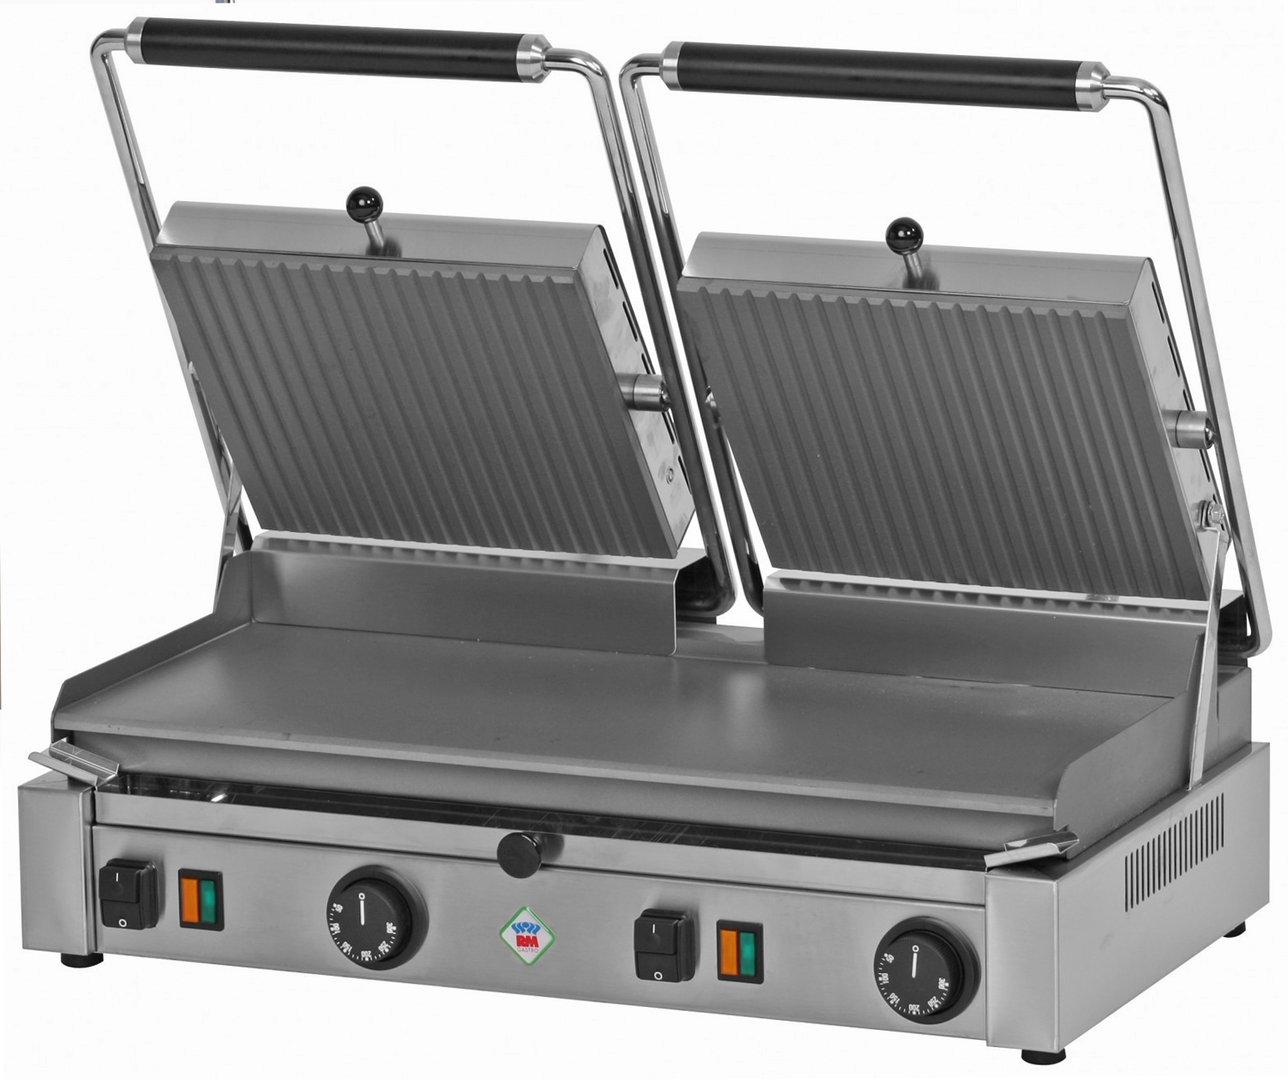 RM Gastro contact grill PD2020L